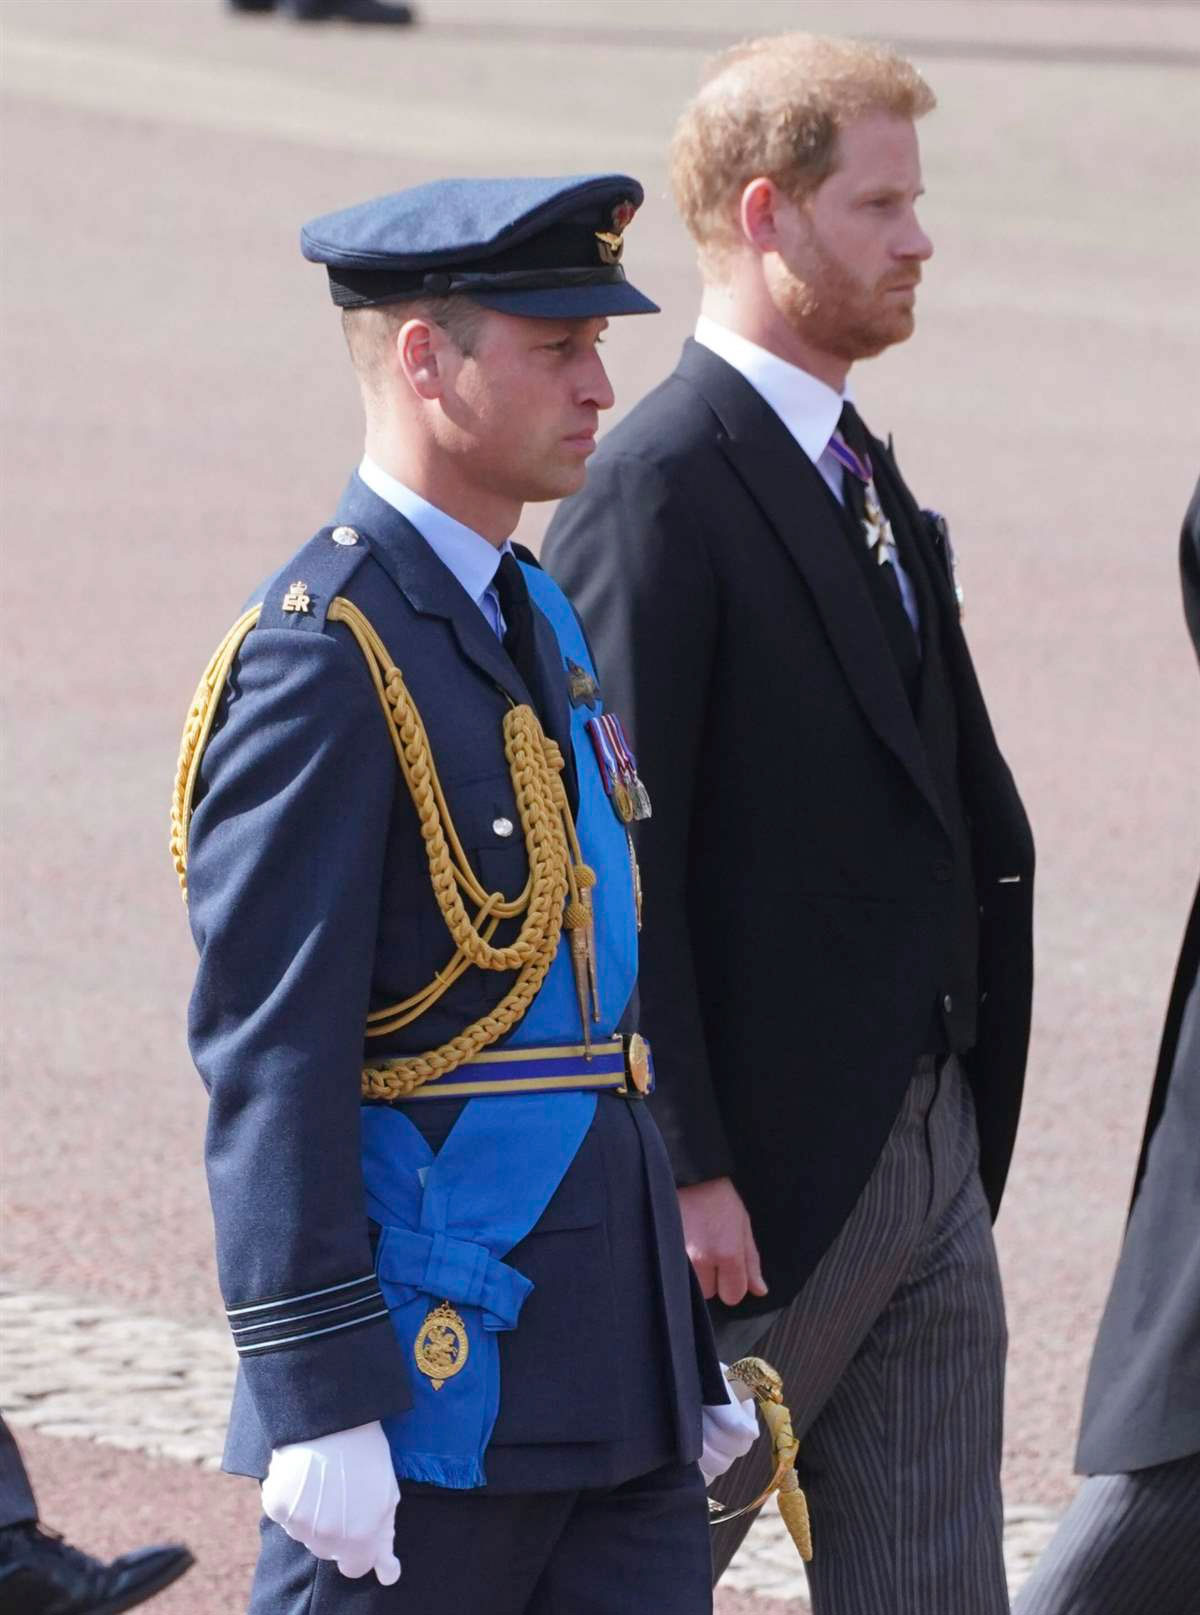 Prince William's message to Prince Harry » William of Wales